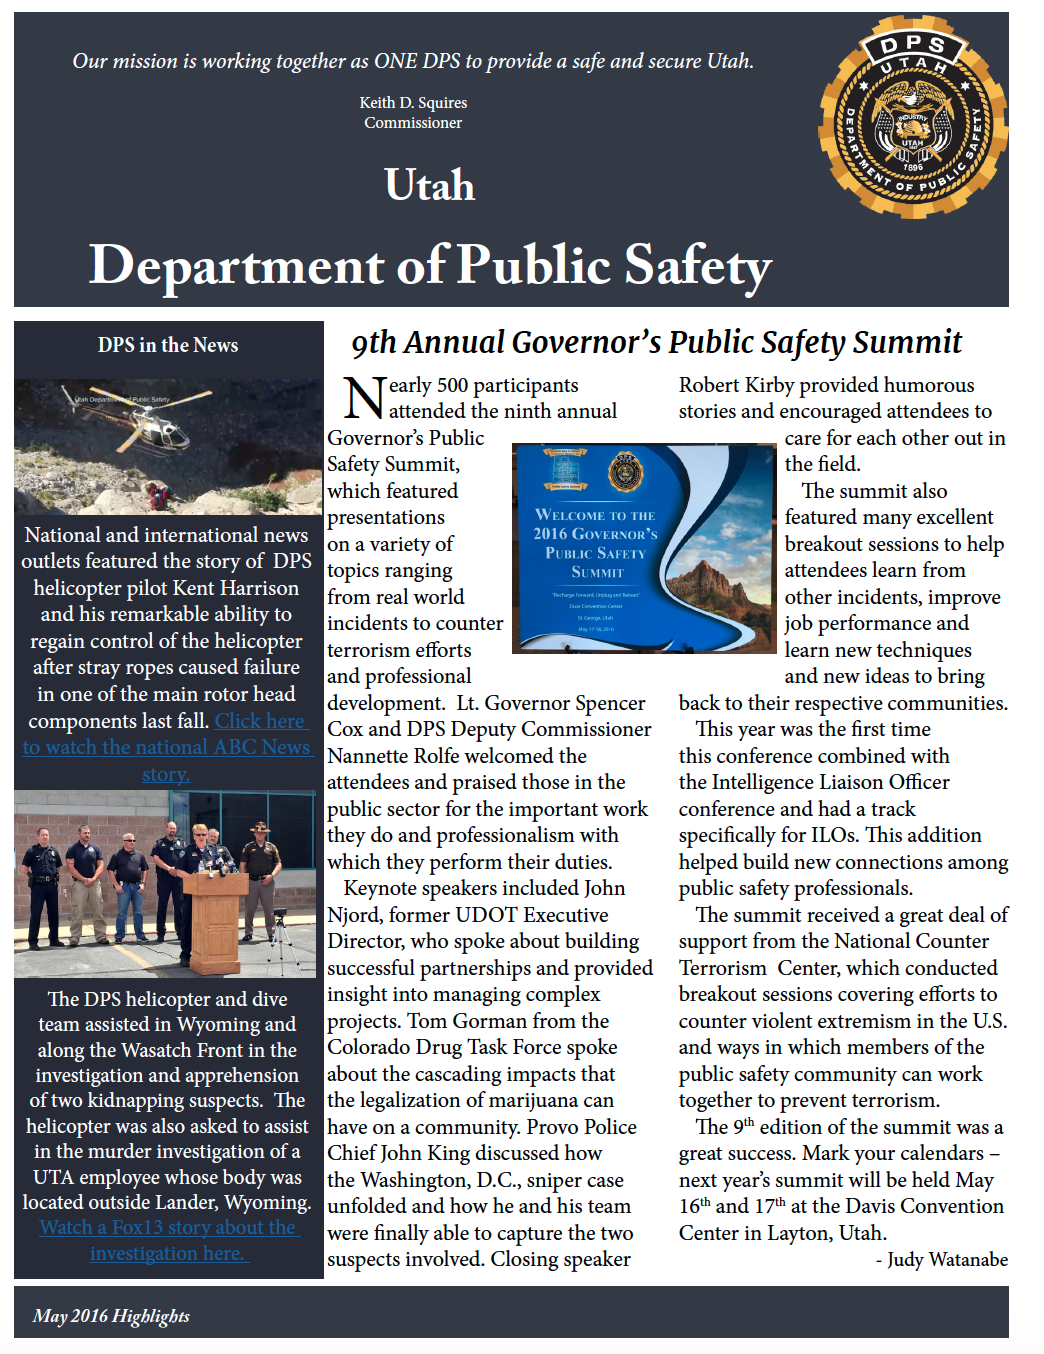 Screen cap of front page of DPS highlights document